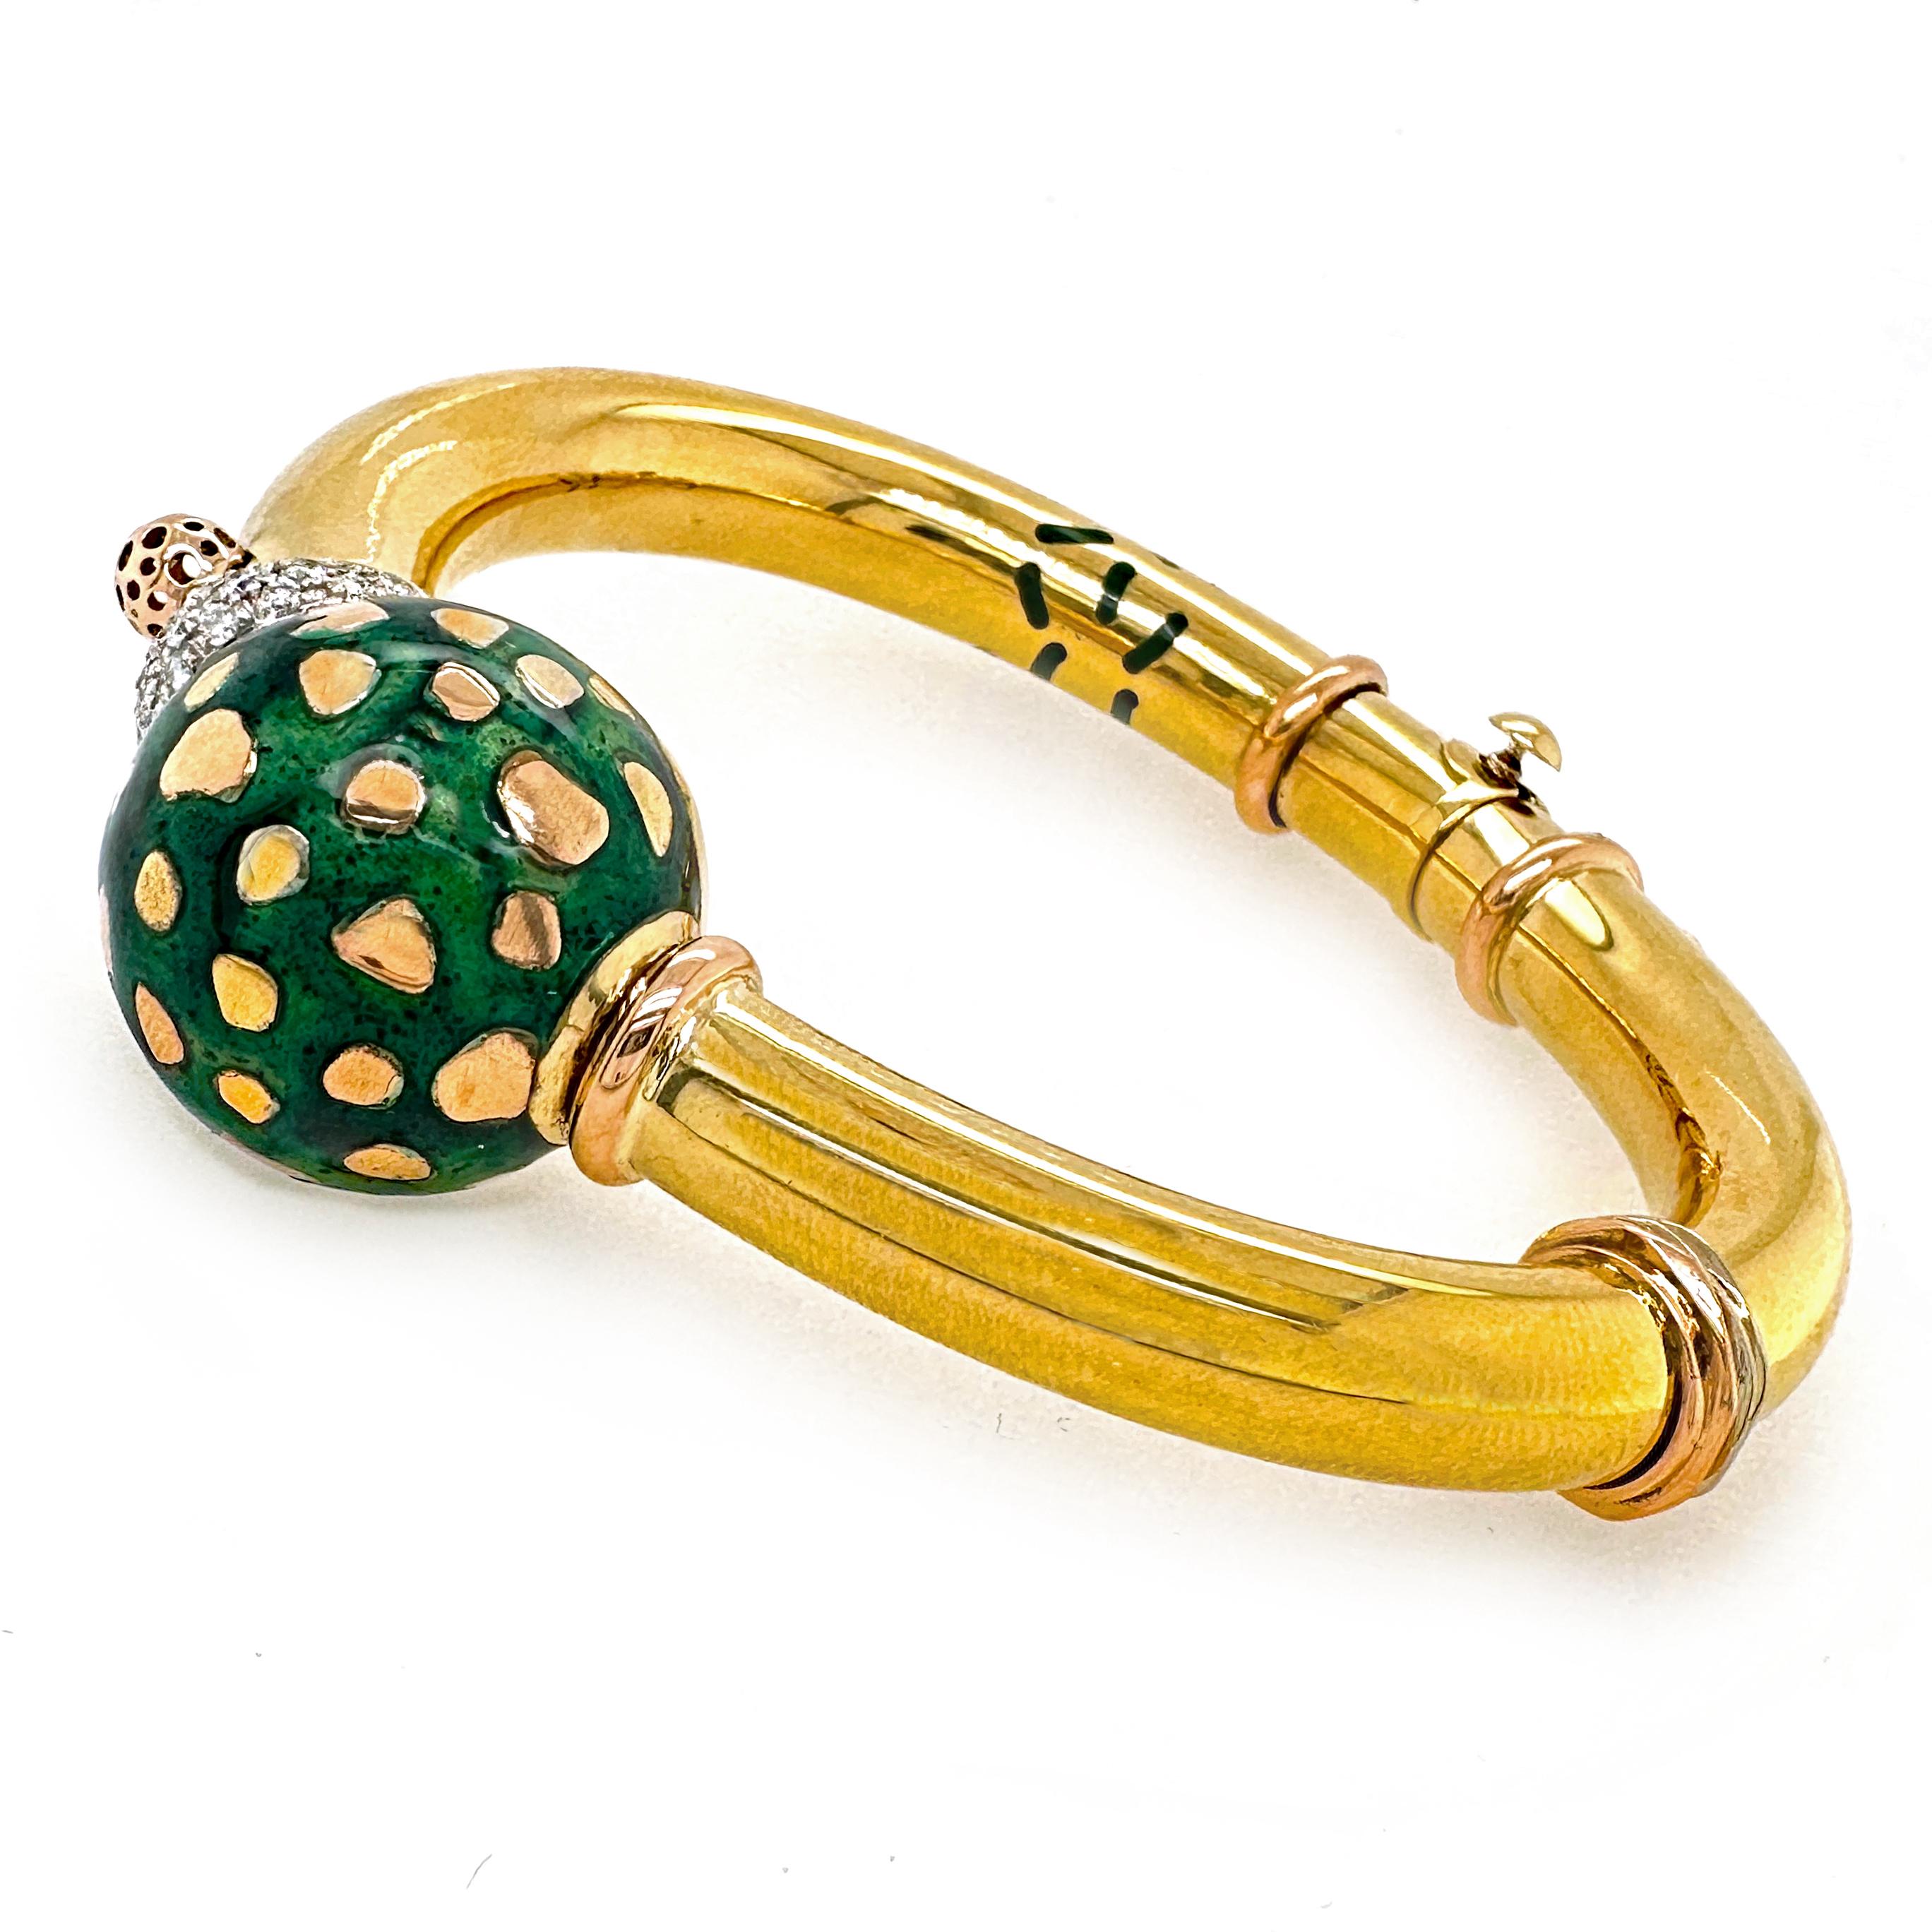 La Nouvelle Bague (LNB), founded in Florence in the late 1970's by the husband-and-wife team of Leopoldo and Lea Poldi, was devoted to Florentine craftsmanship, especially enamel work.  Mr. Poldi worked with the best Italian metalsmiths to develop